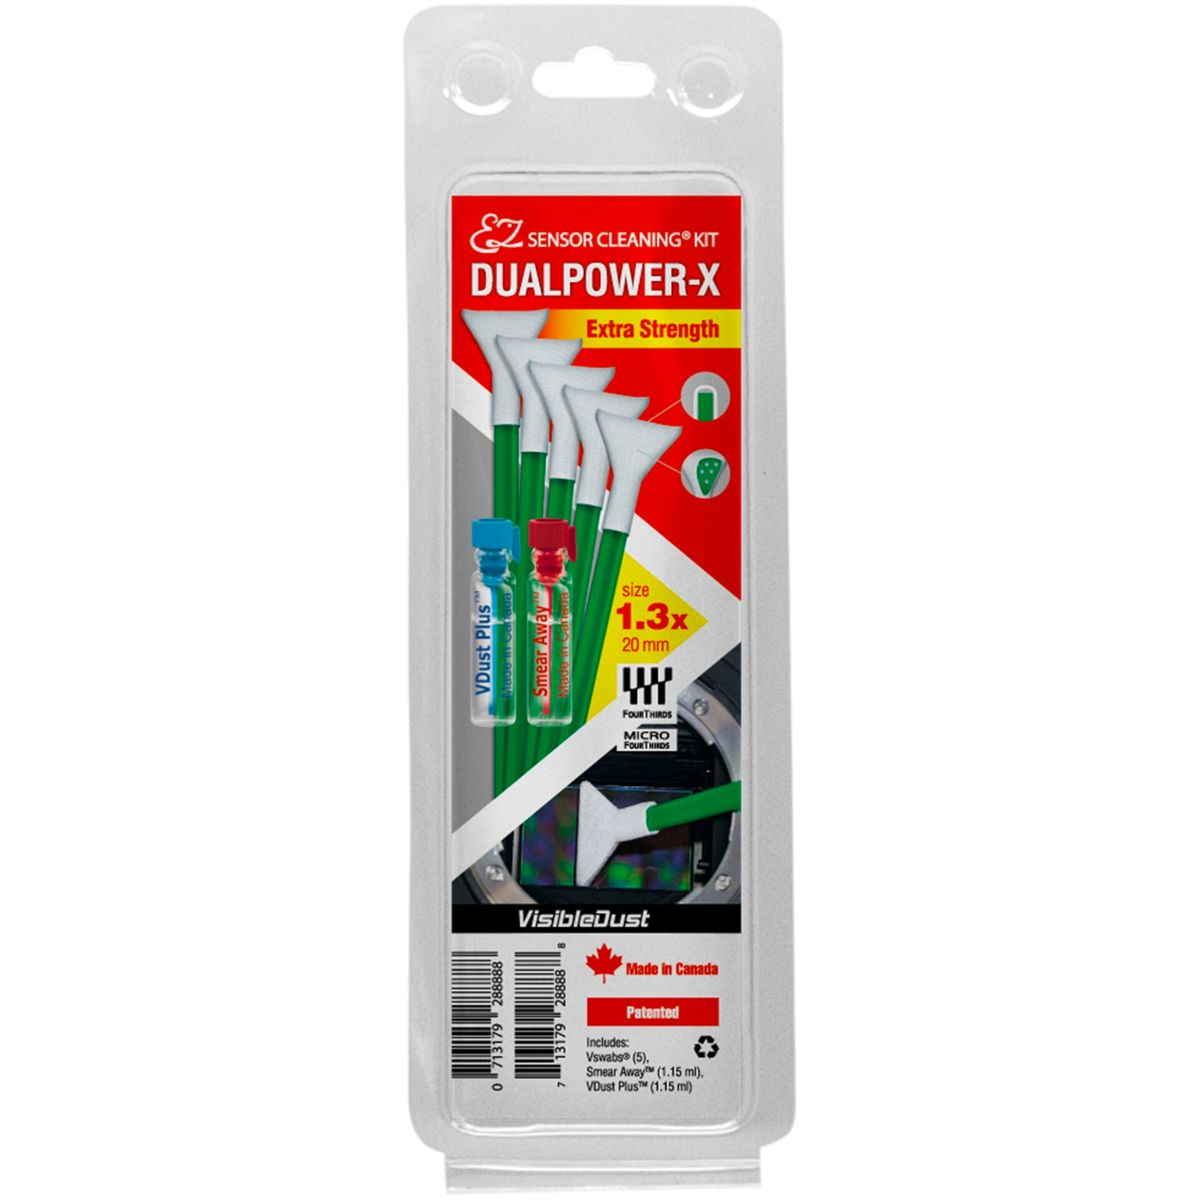 VISIBLE DUST DUALPOWER-X 1.3x not available not Extra available, Green Strength Swab, MXD100